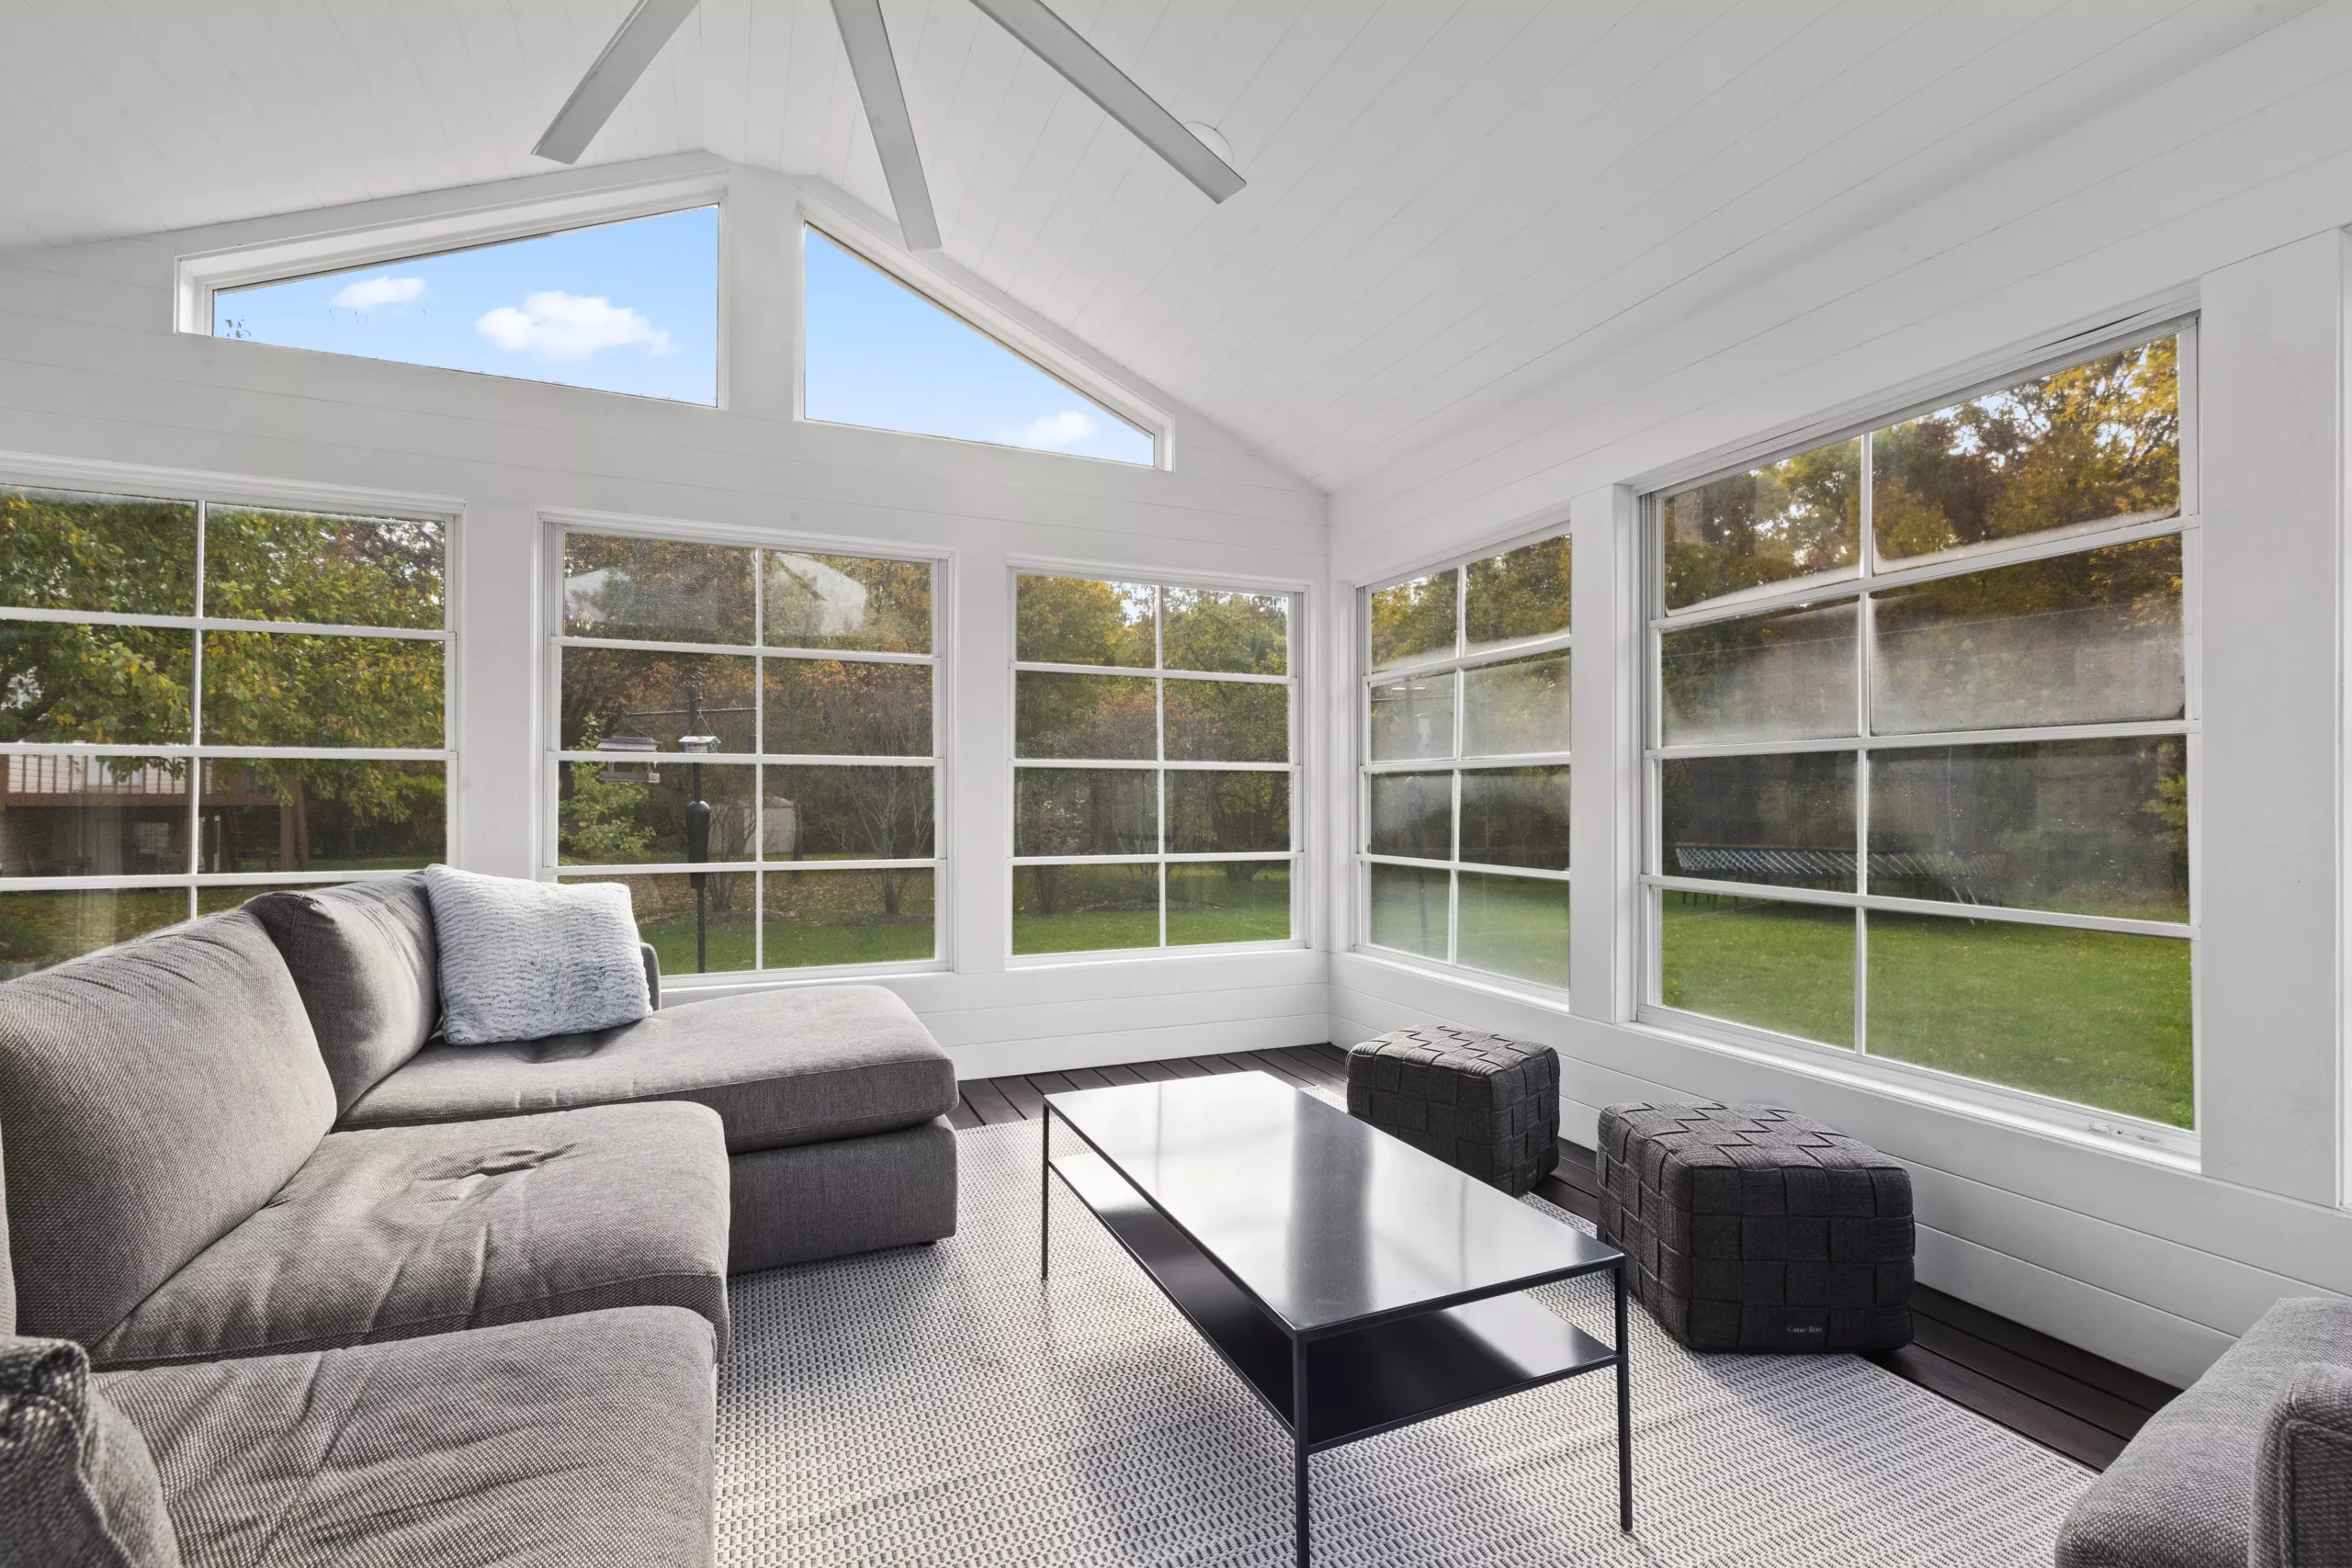 A sunroom with large windows and a gray couch perfect for relaxation and enjoying the natural daylight.